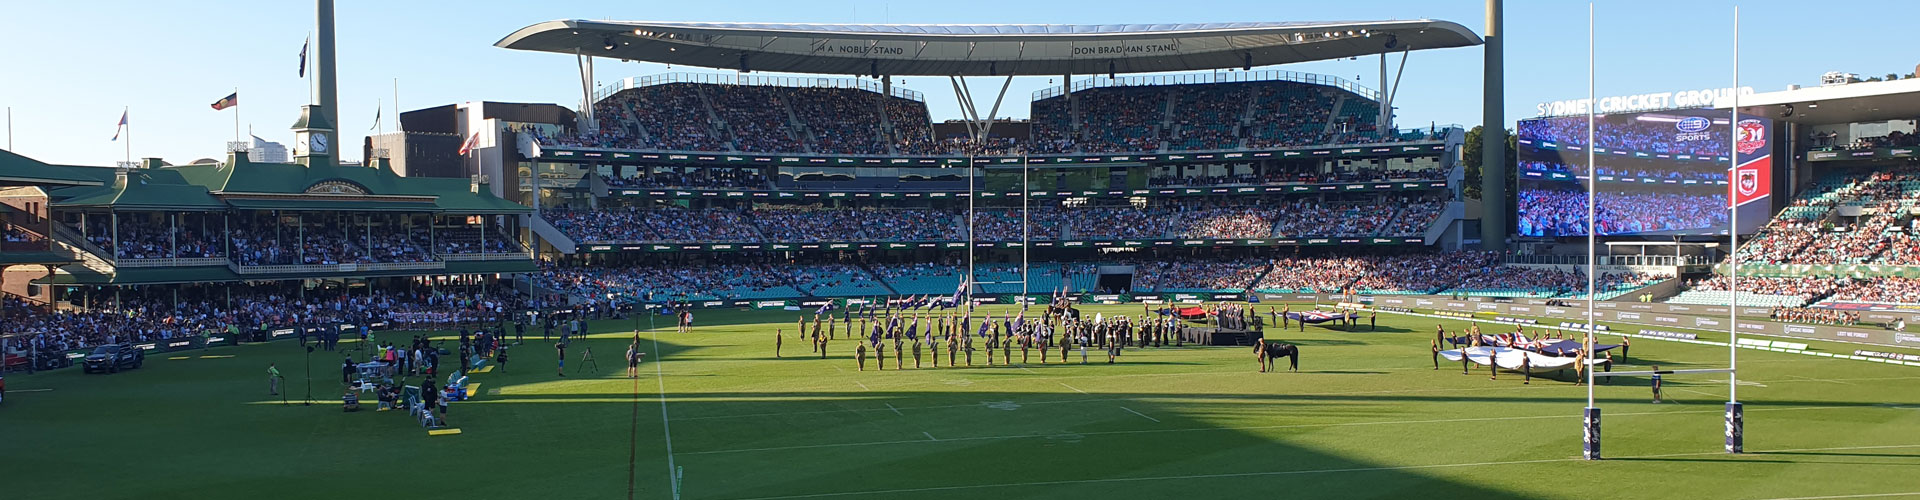 Download 2020 NRL Grand Final Corporate Hospitality Packages at the SCG